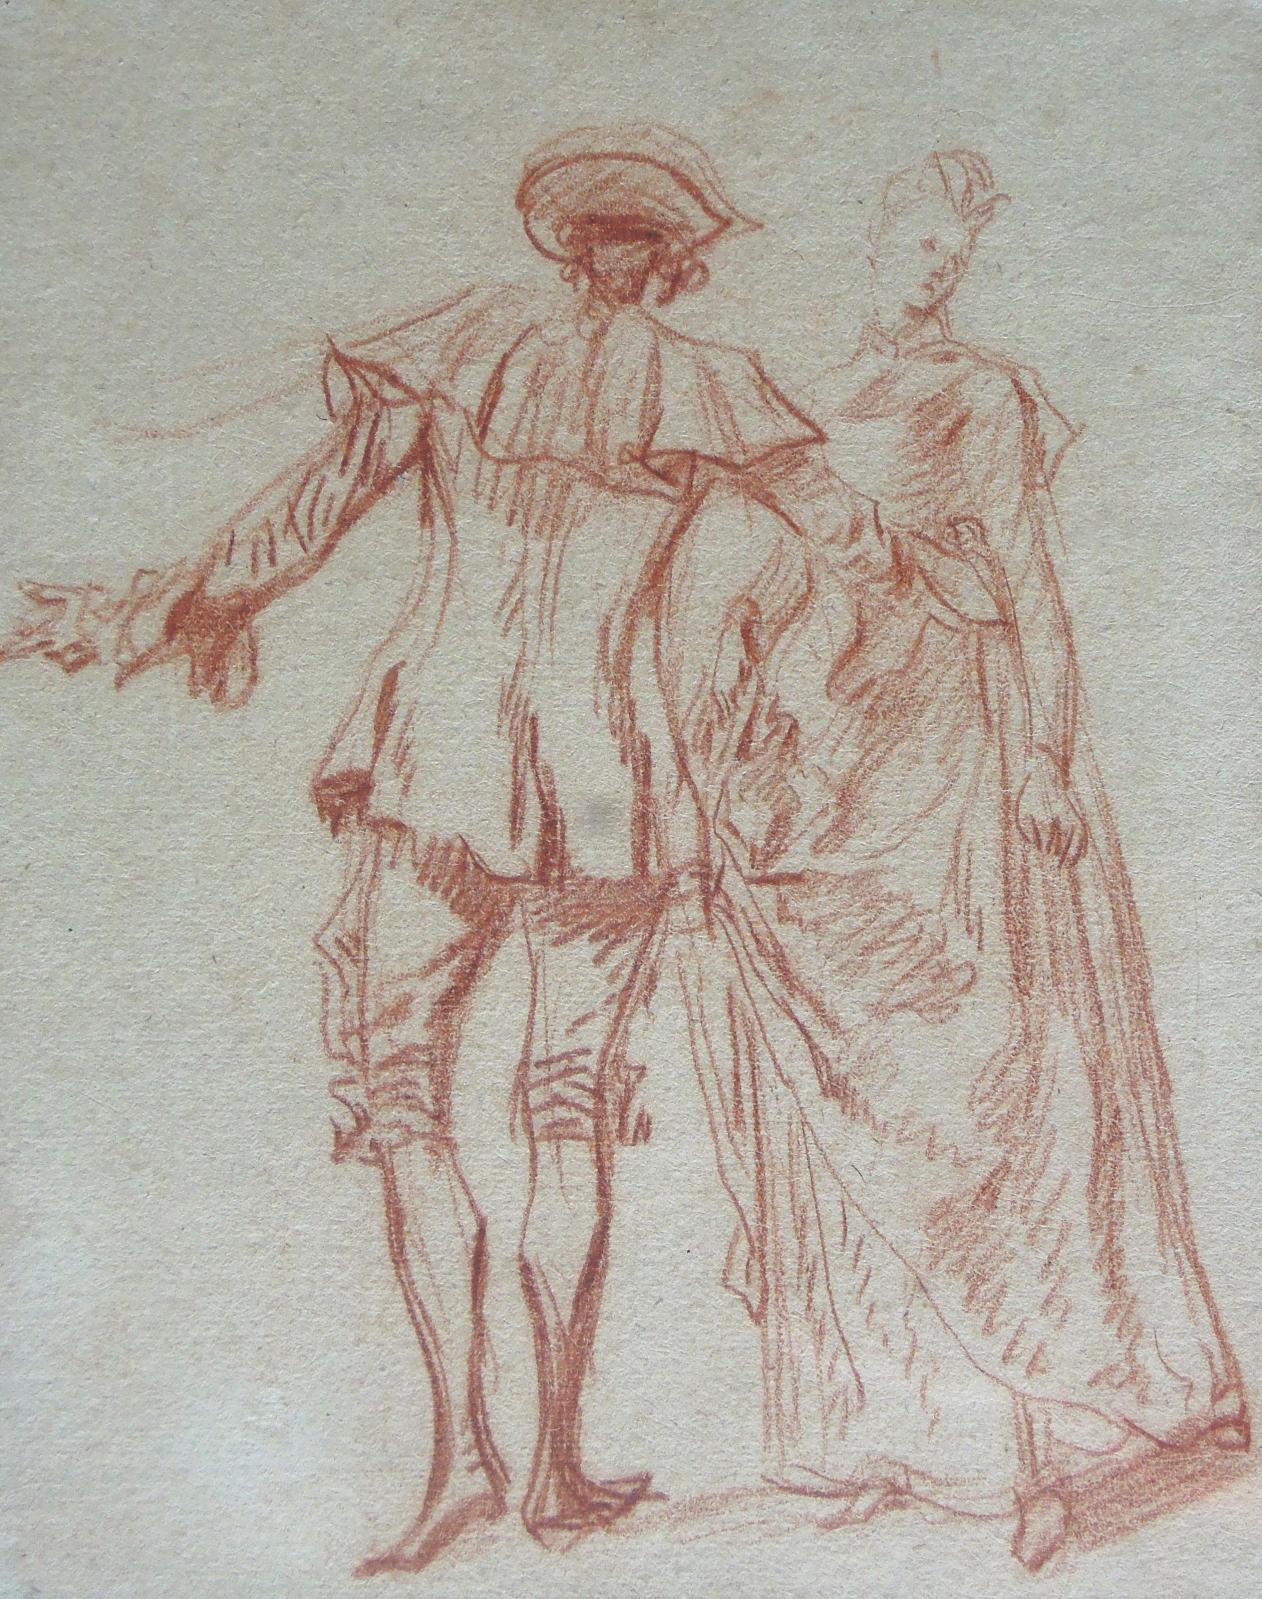 Now Embarking for Cythera with a Drawing by Watteau